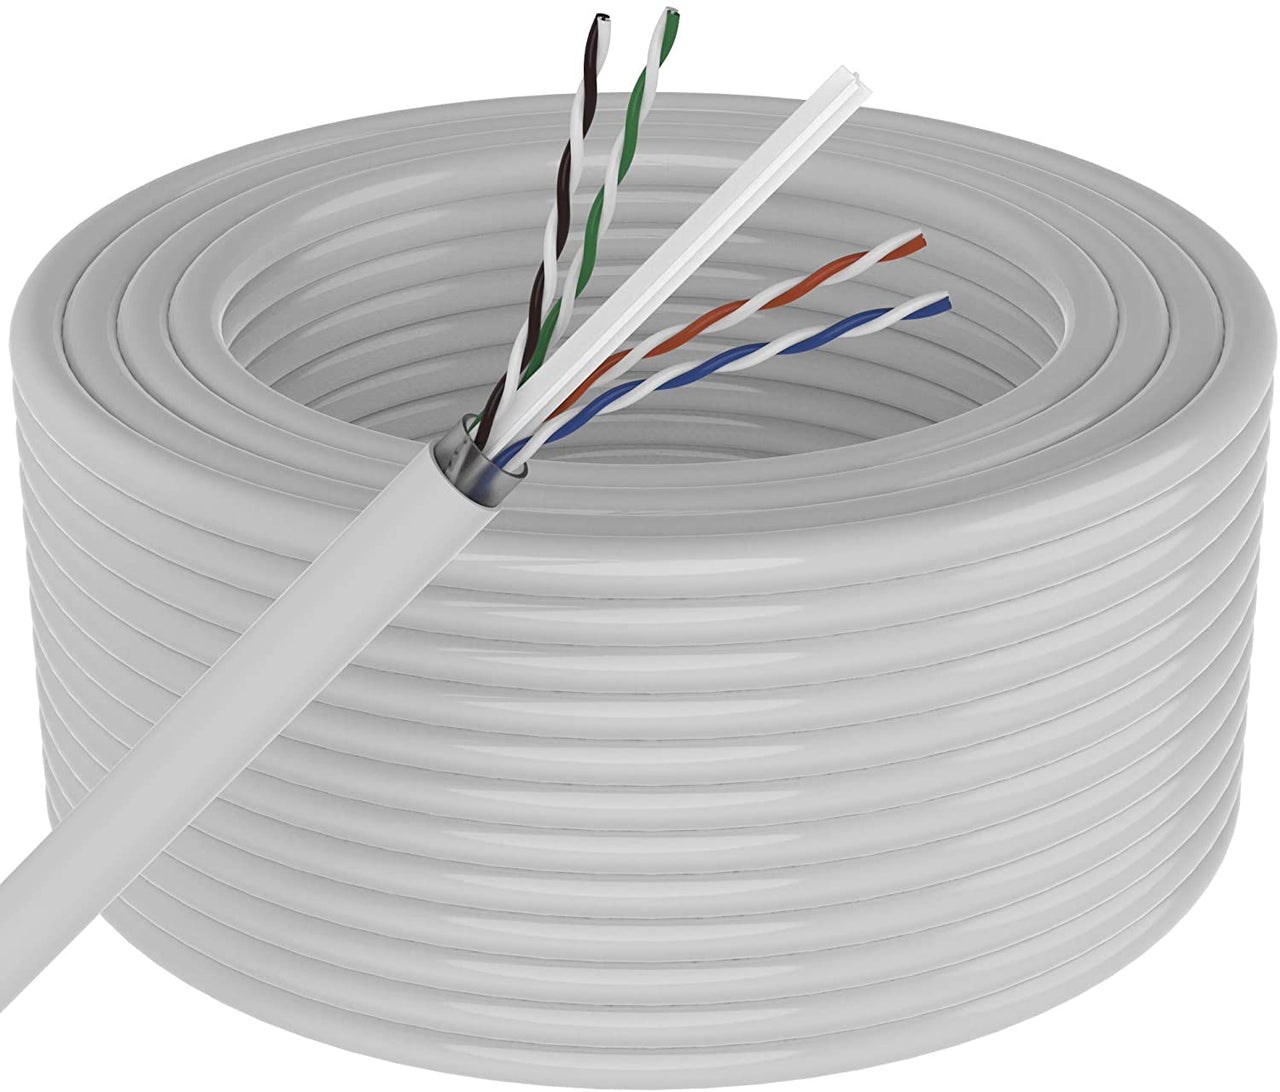 Absolute 500' Cat6 Ethernet White Bulk Network Cable<br/> 23AWG 600Mhz UL Bare Solid Copper Wire UTP 500' White